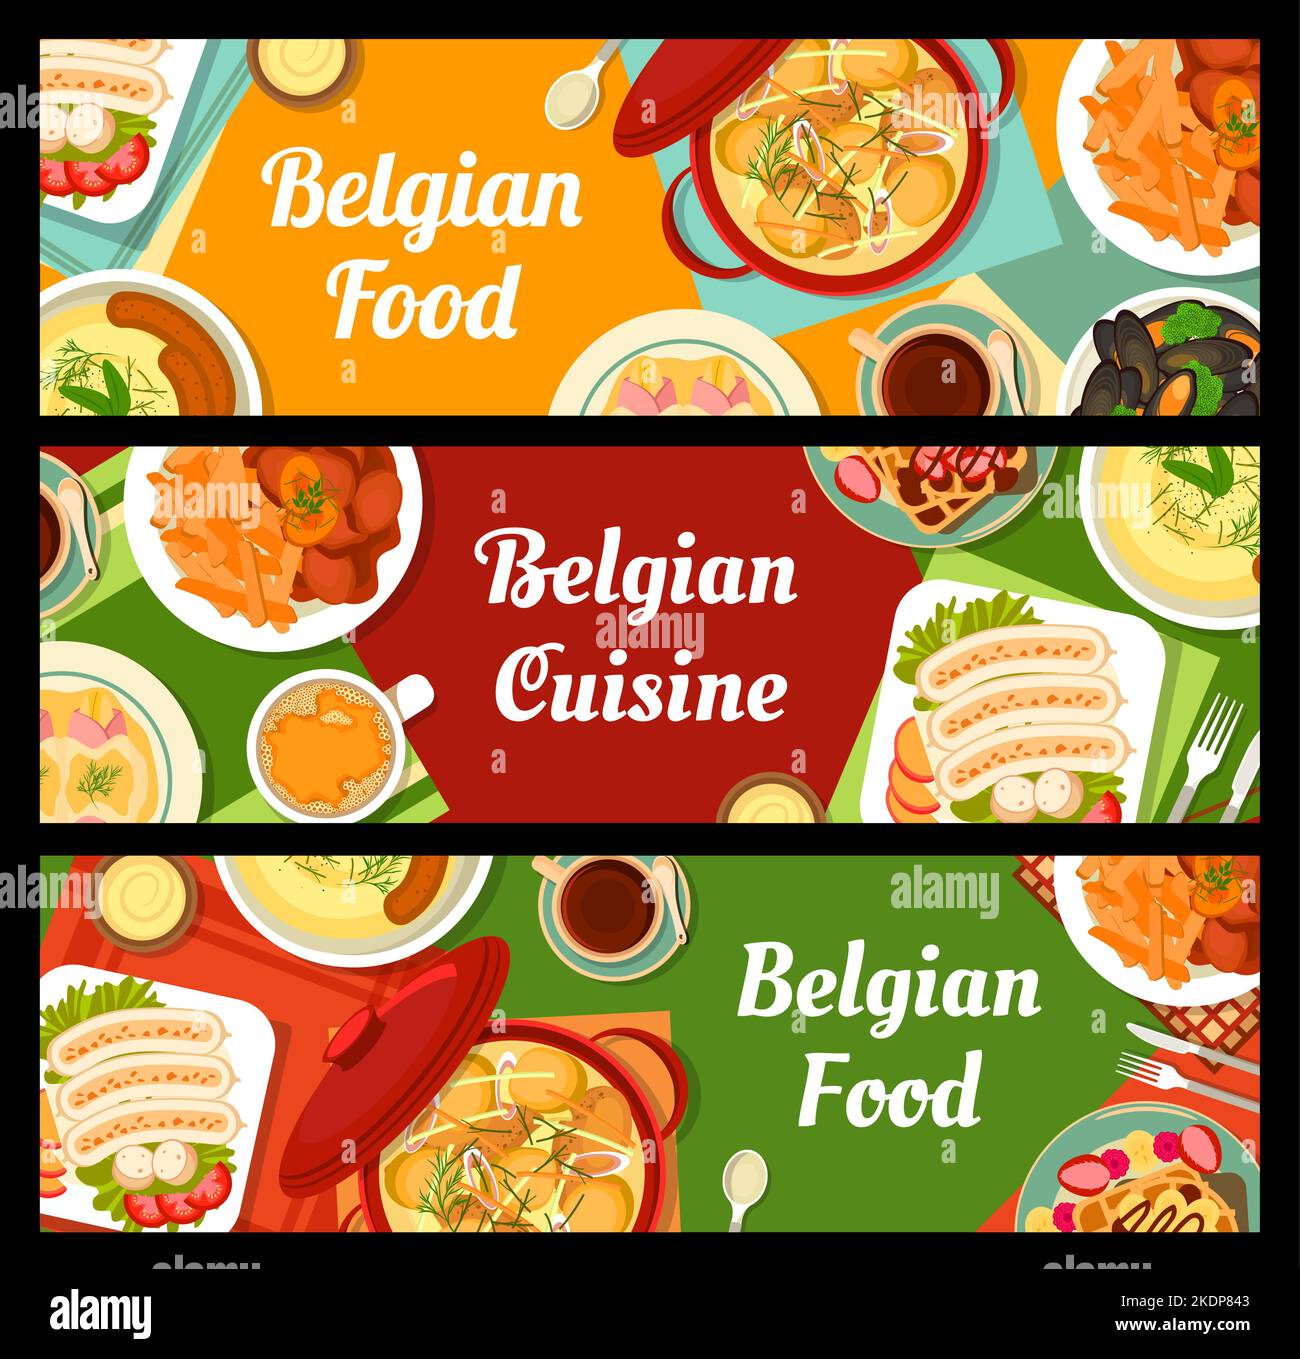 Belgian cuisine banners, Belgium food dishes meals for restaurant menu, vector. Belgian traditional lunch and dinner food, braised endive with bacon and cream, chicken stew waterzooi or triple sausage Stock Vector